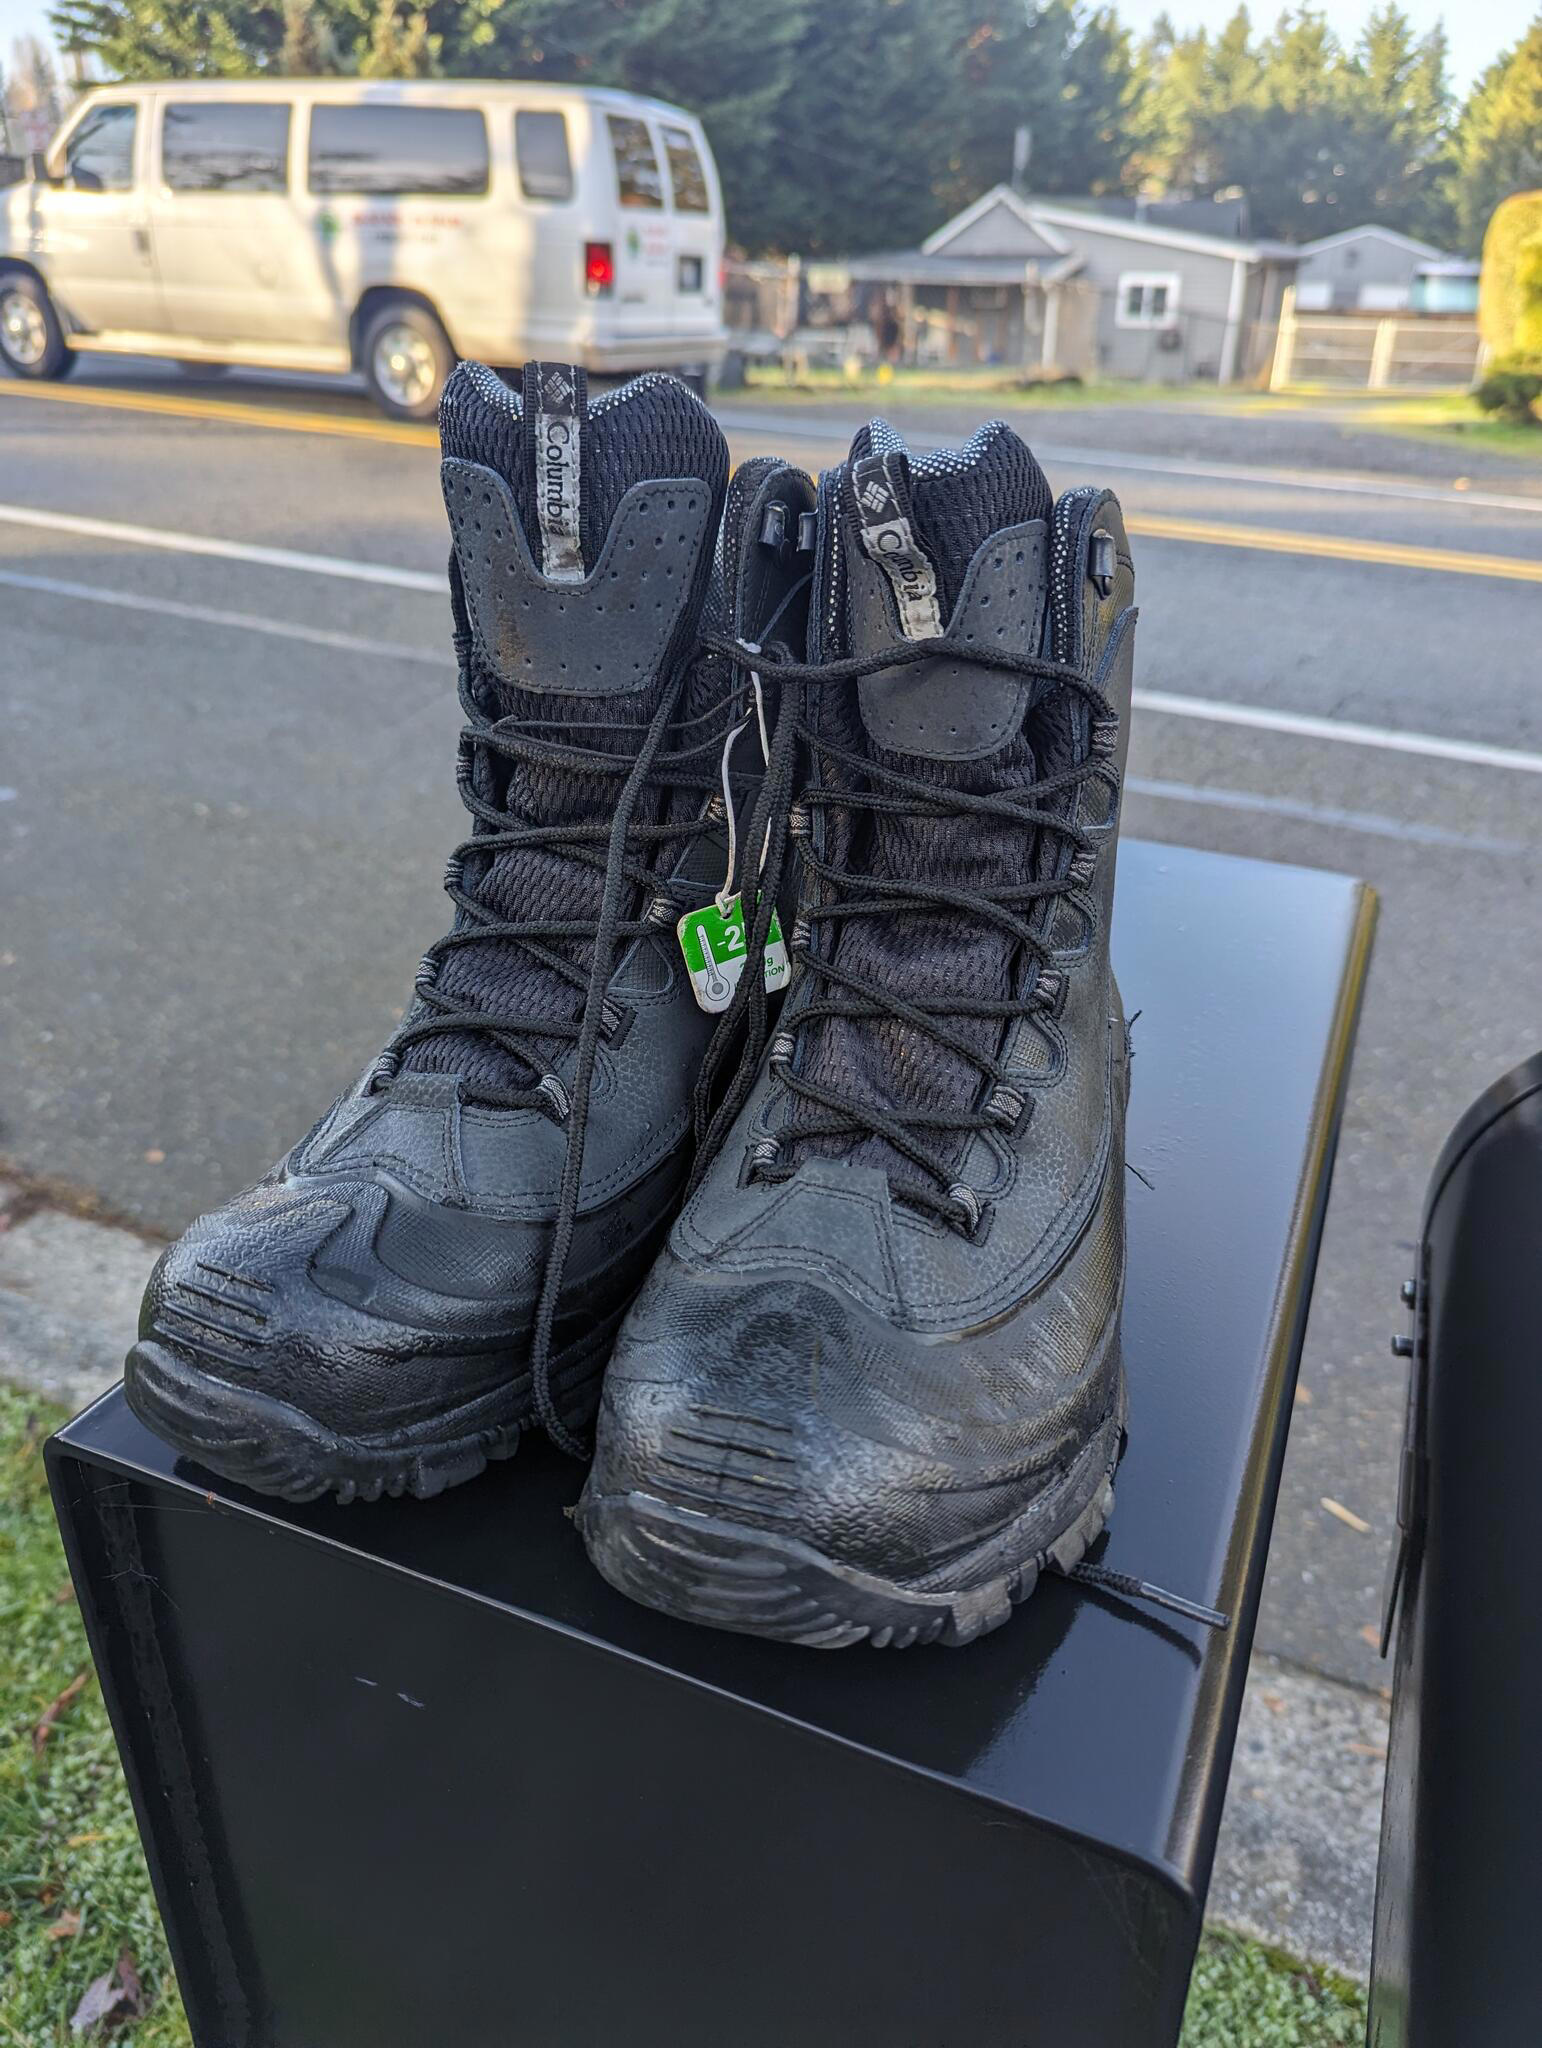 Found these brand-new Columbia boots size 10. - North Hill